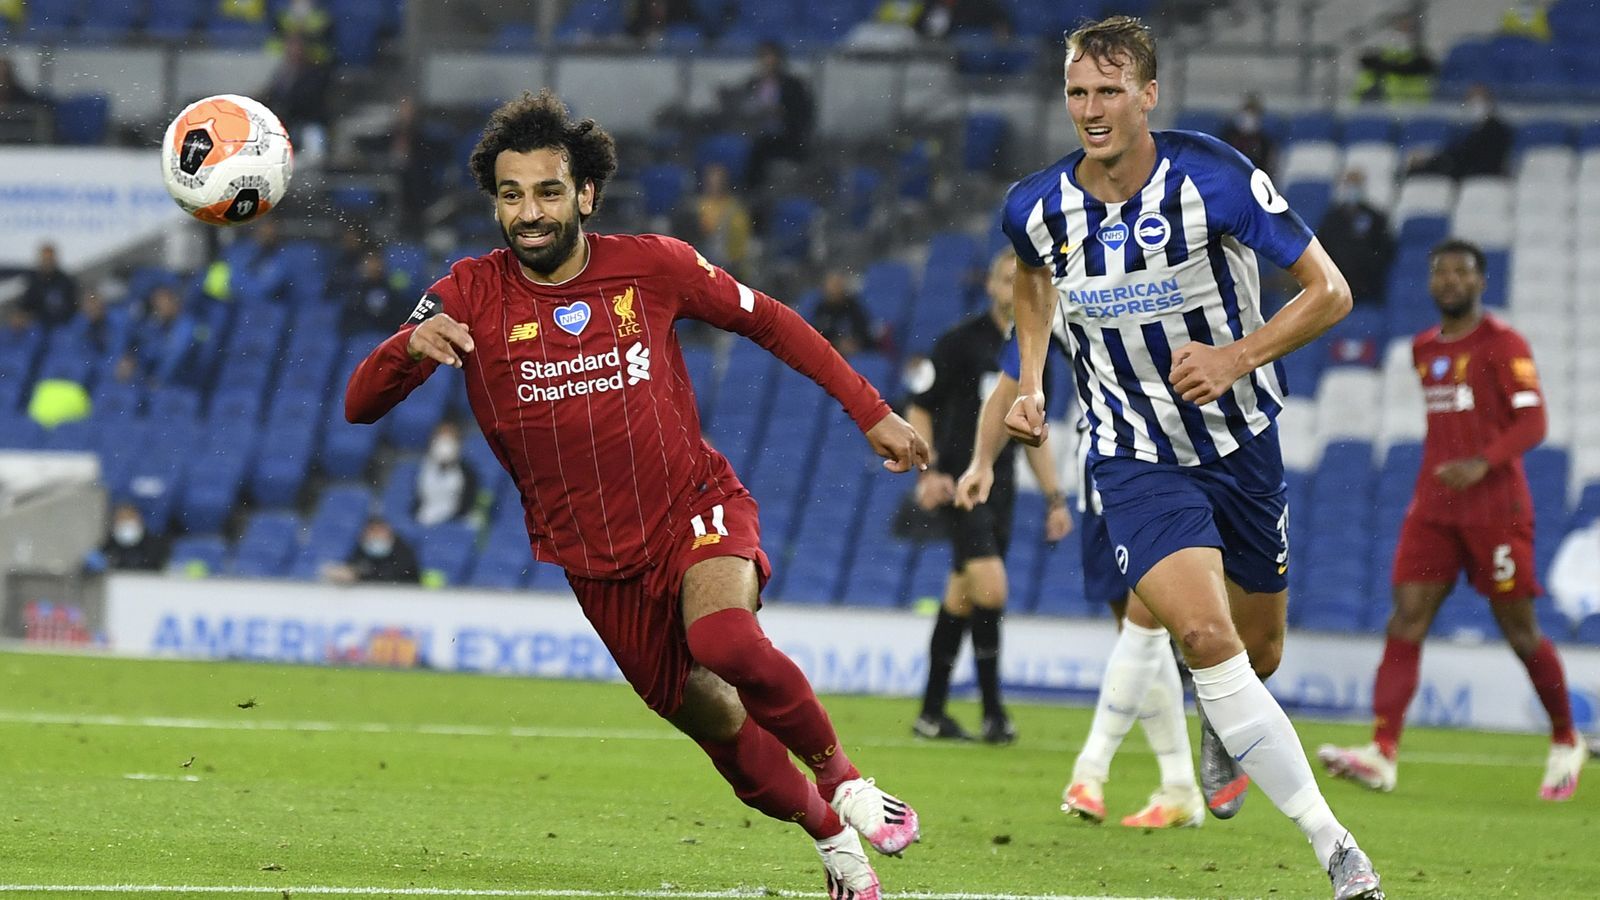 Liverpool Wins against Brighton with Two Goals from Star Player Salah